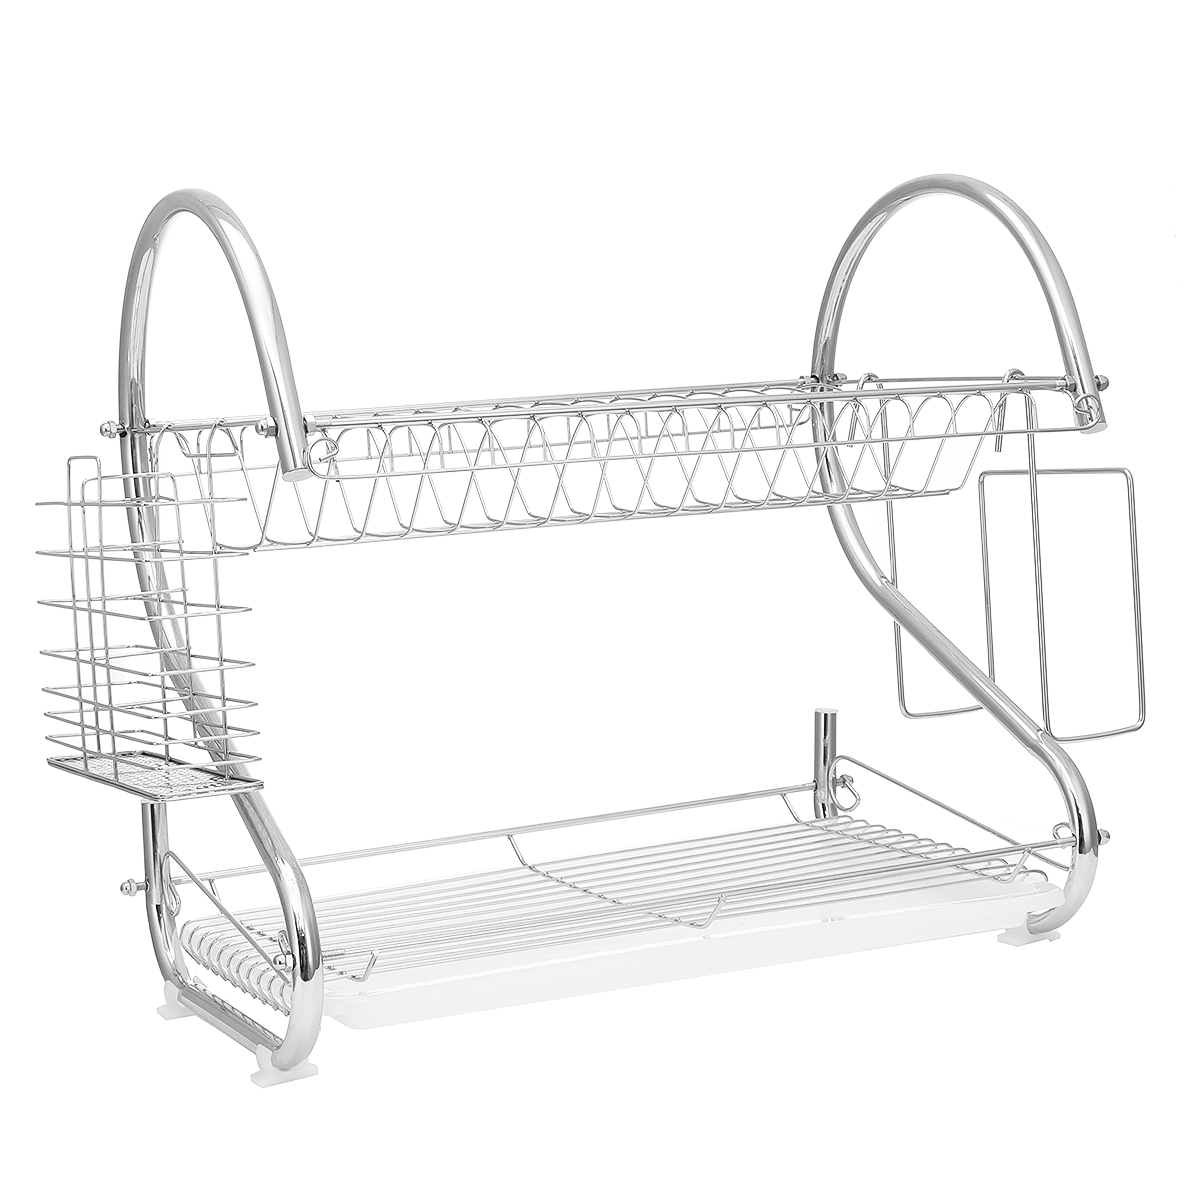 Dish-Drying-Rack-2-Tier-Dish-Rack-with-Utensil-Holder-Cup-Holder-and-Dish-Drainer-for-Kitchen-Counte-1665917-10